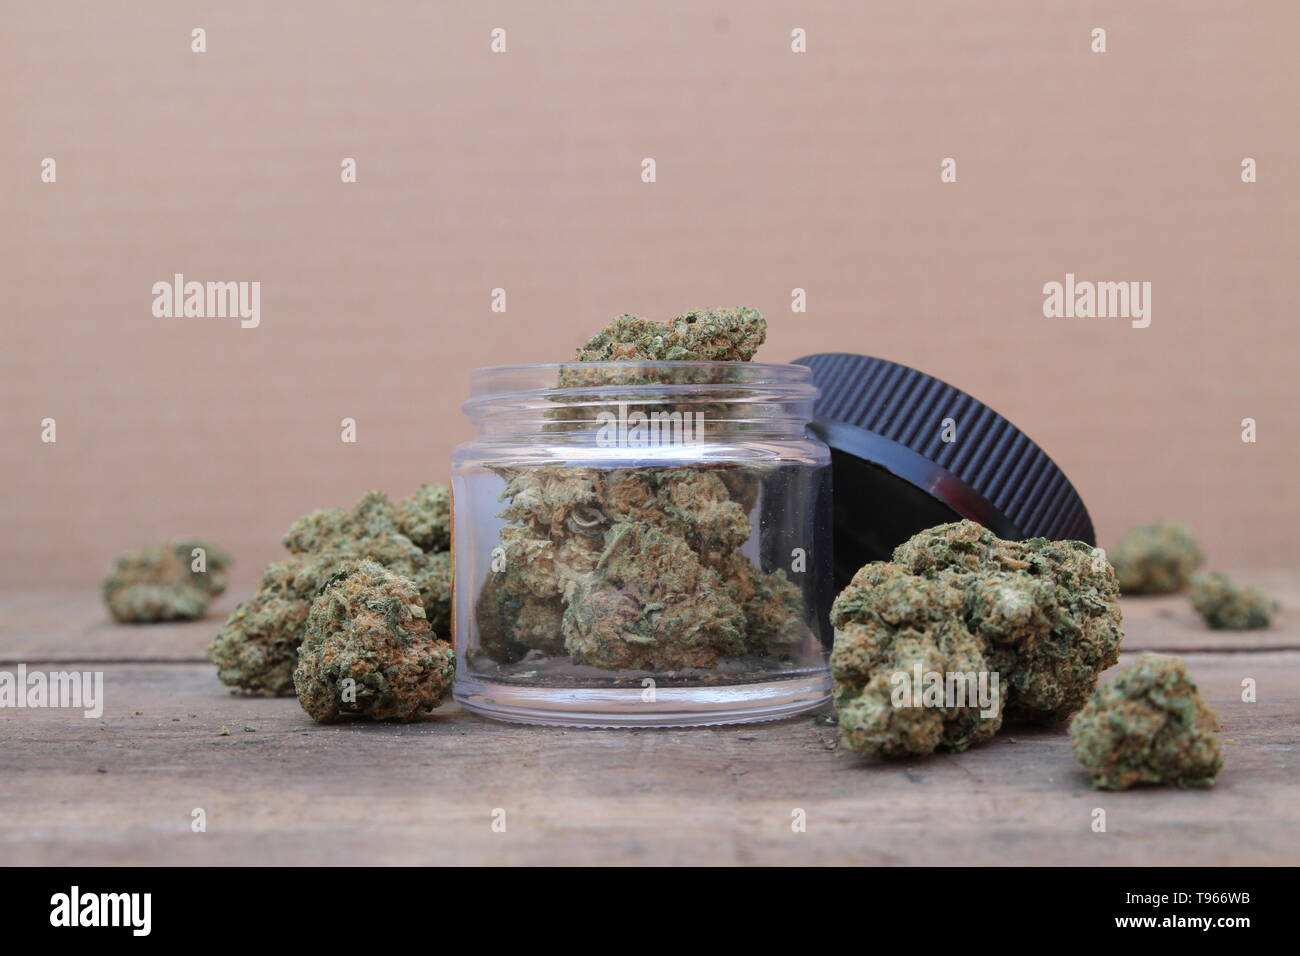 Open Glass Jar of Marijuana Sitting on Table Surrounded by Cannabis Buds Stock Photo